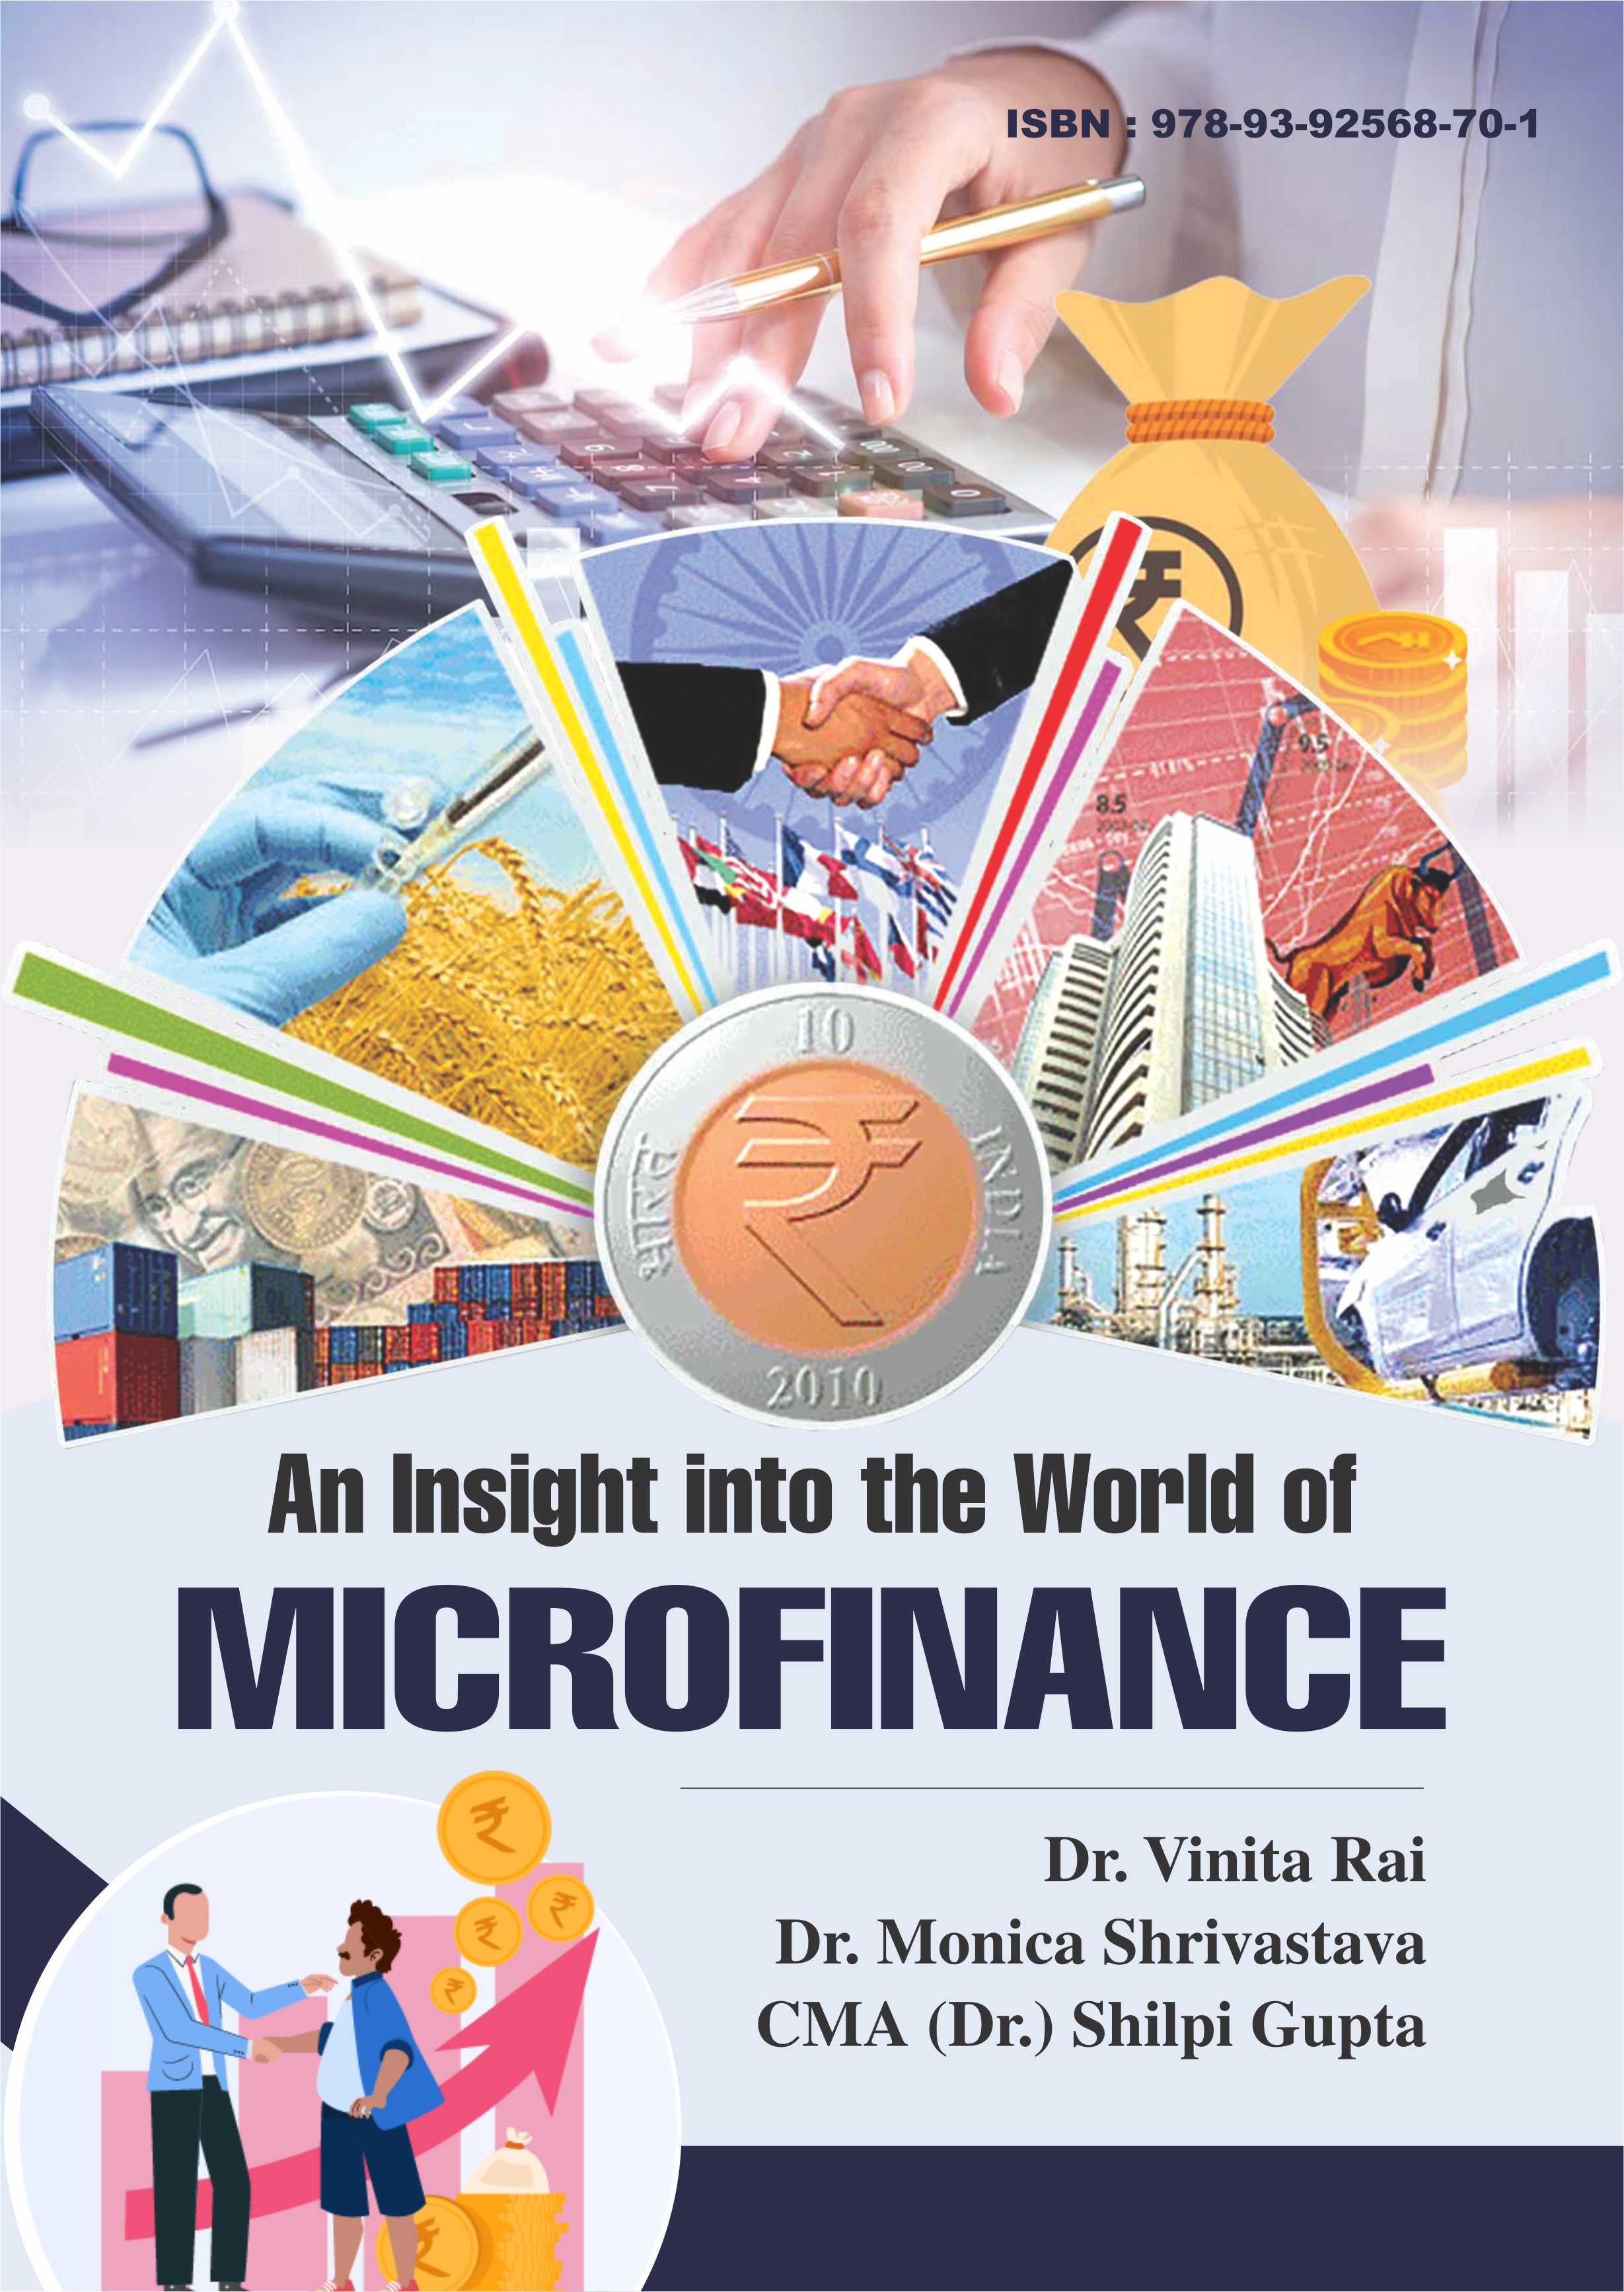 An Insight into the World of Microfinance